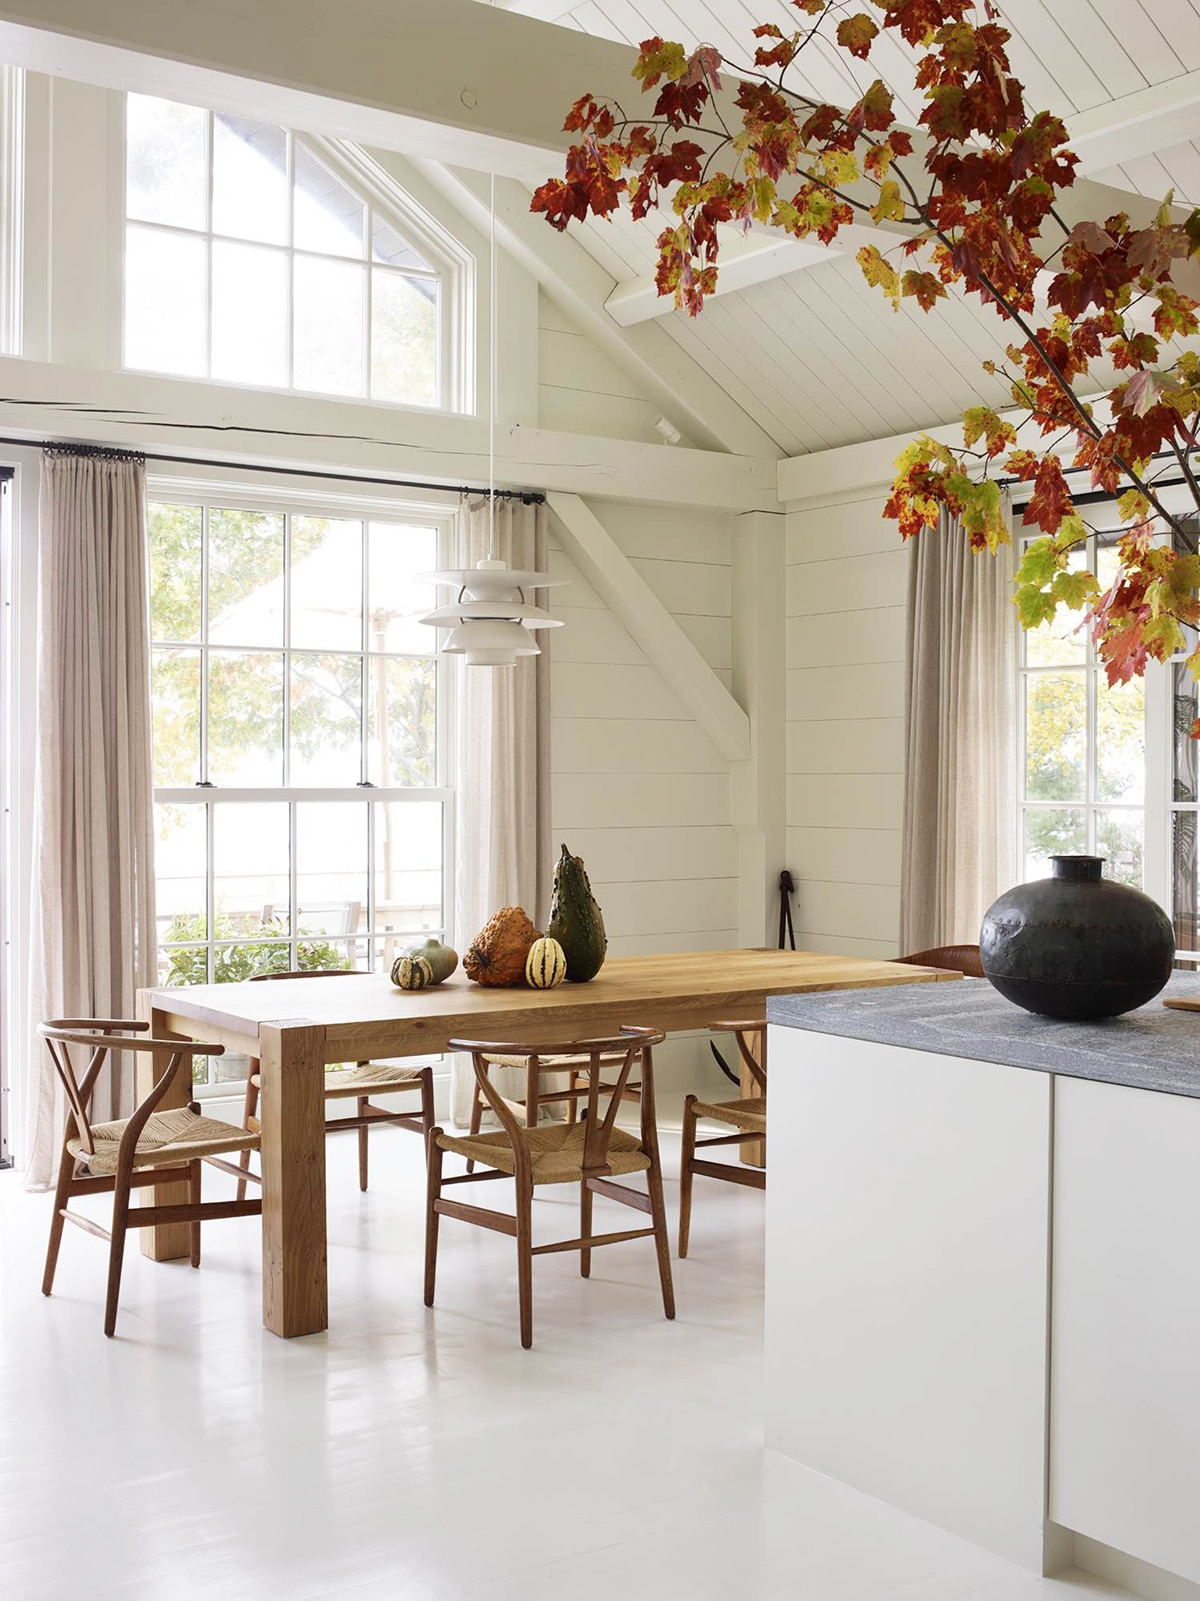 organic wood and creamy walls in a simple dining room | seaside cottage house tour on coco kelley